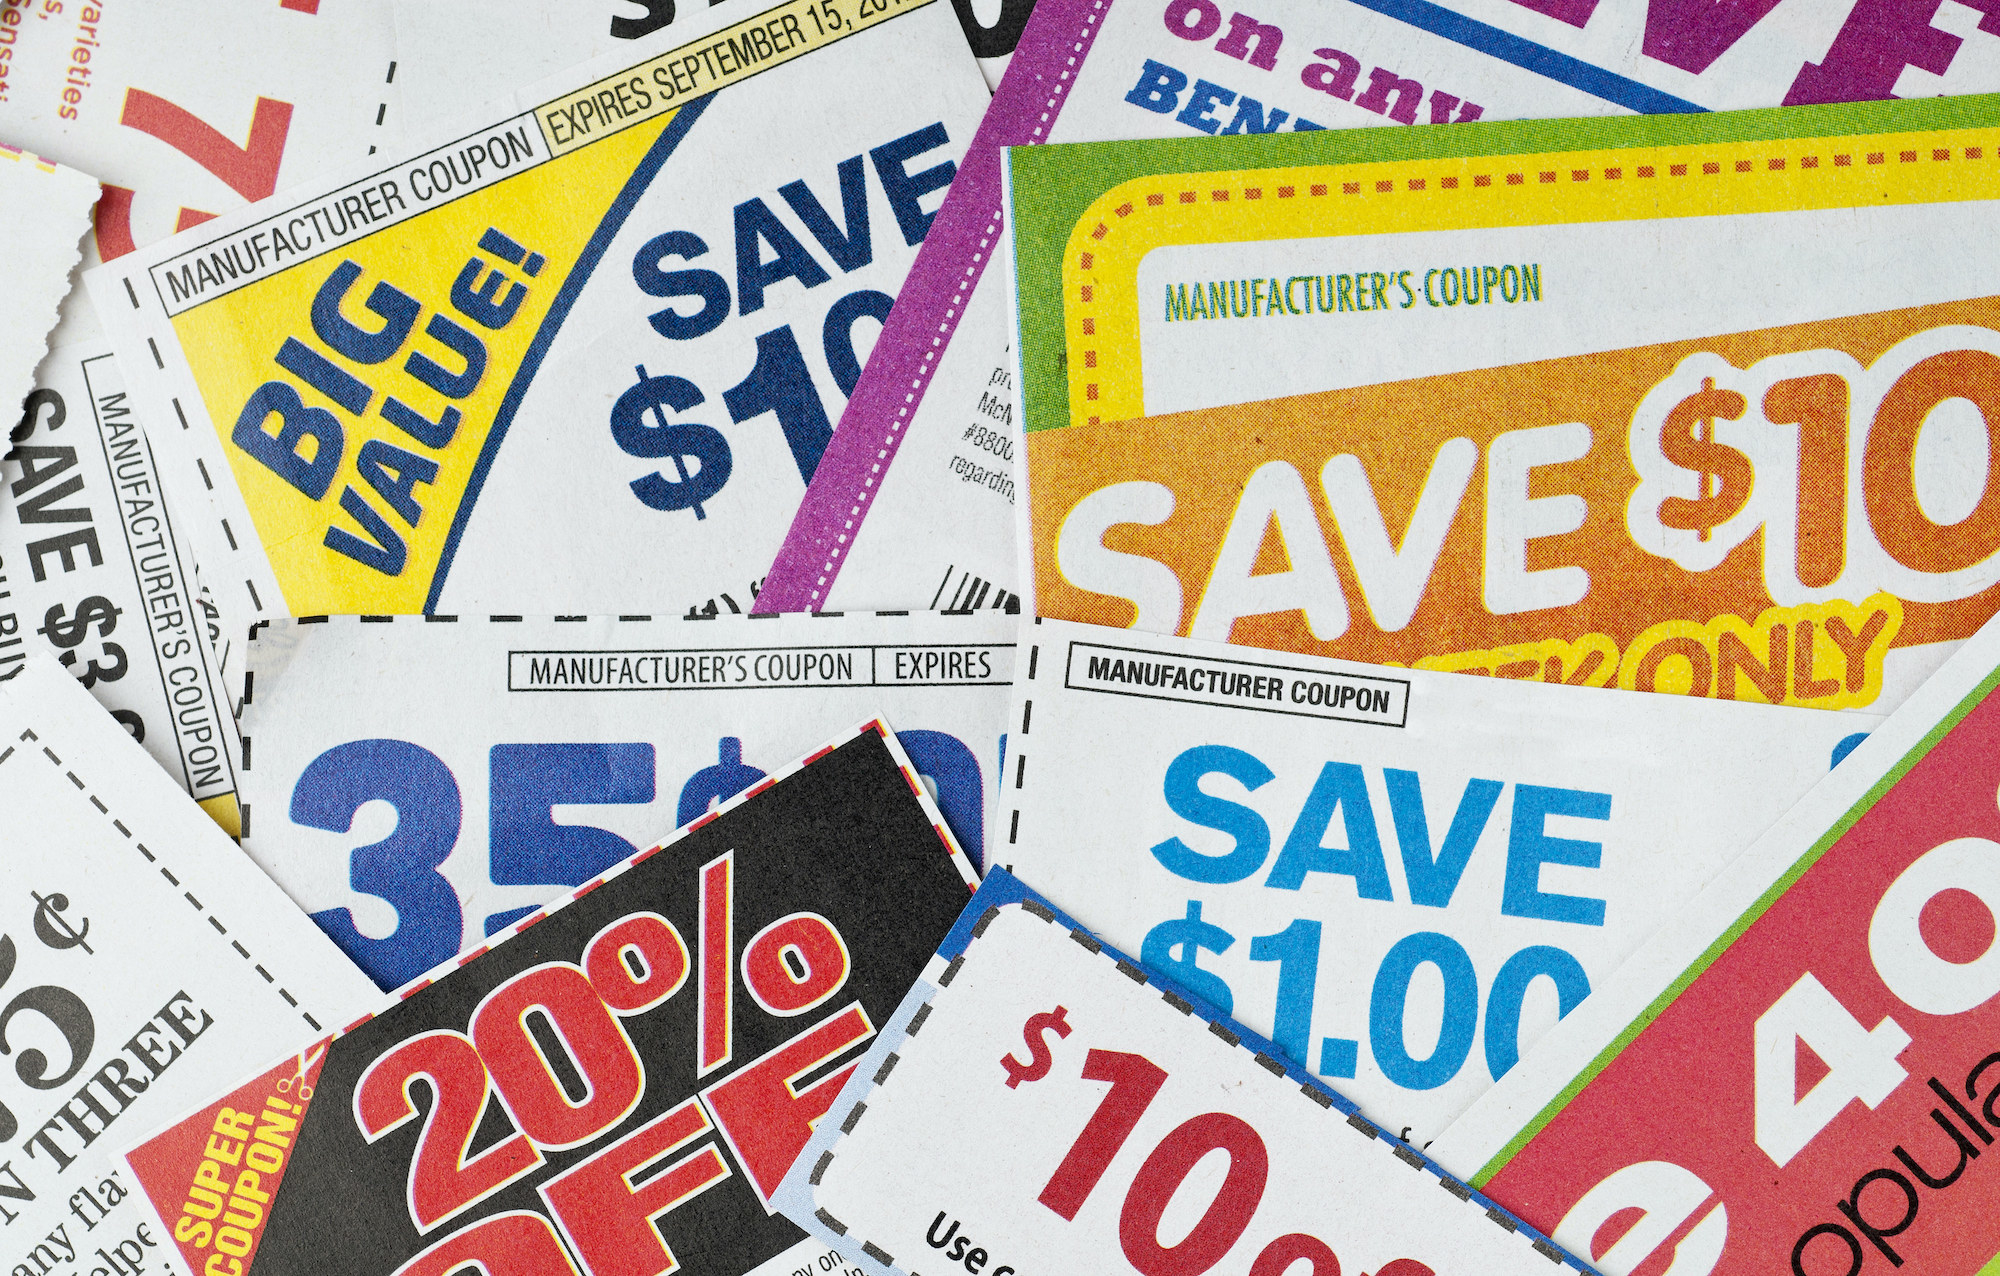 A stack of coupons with varying deals.